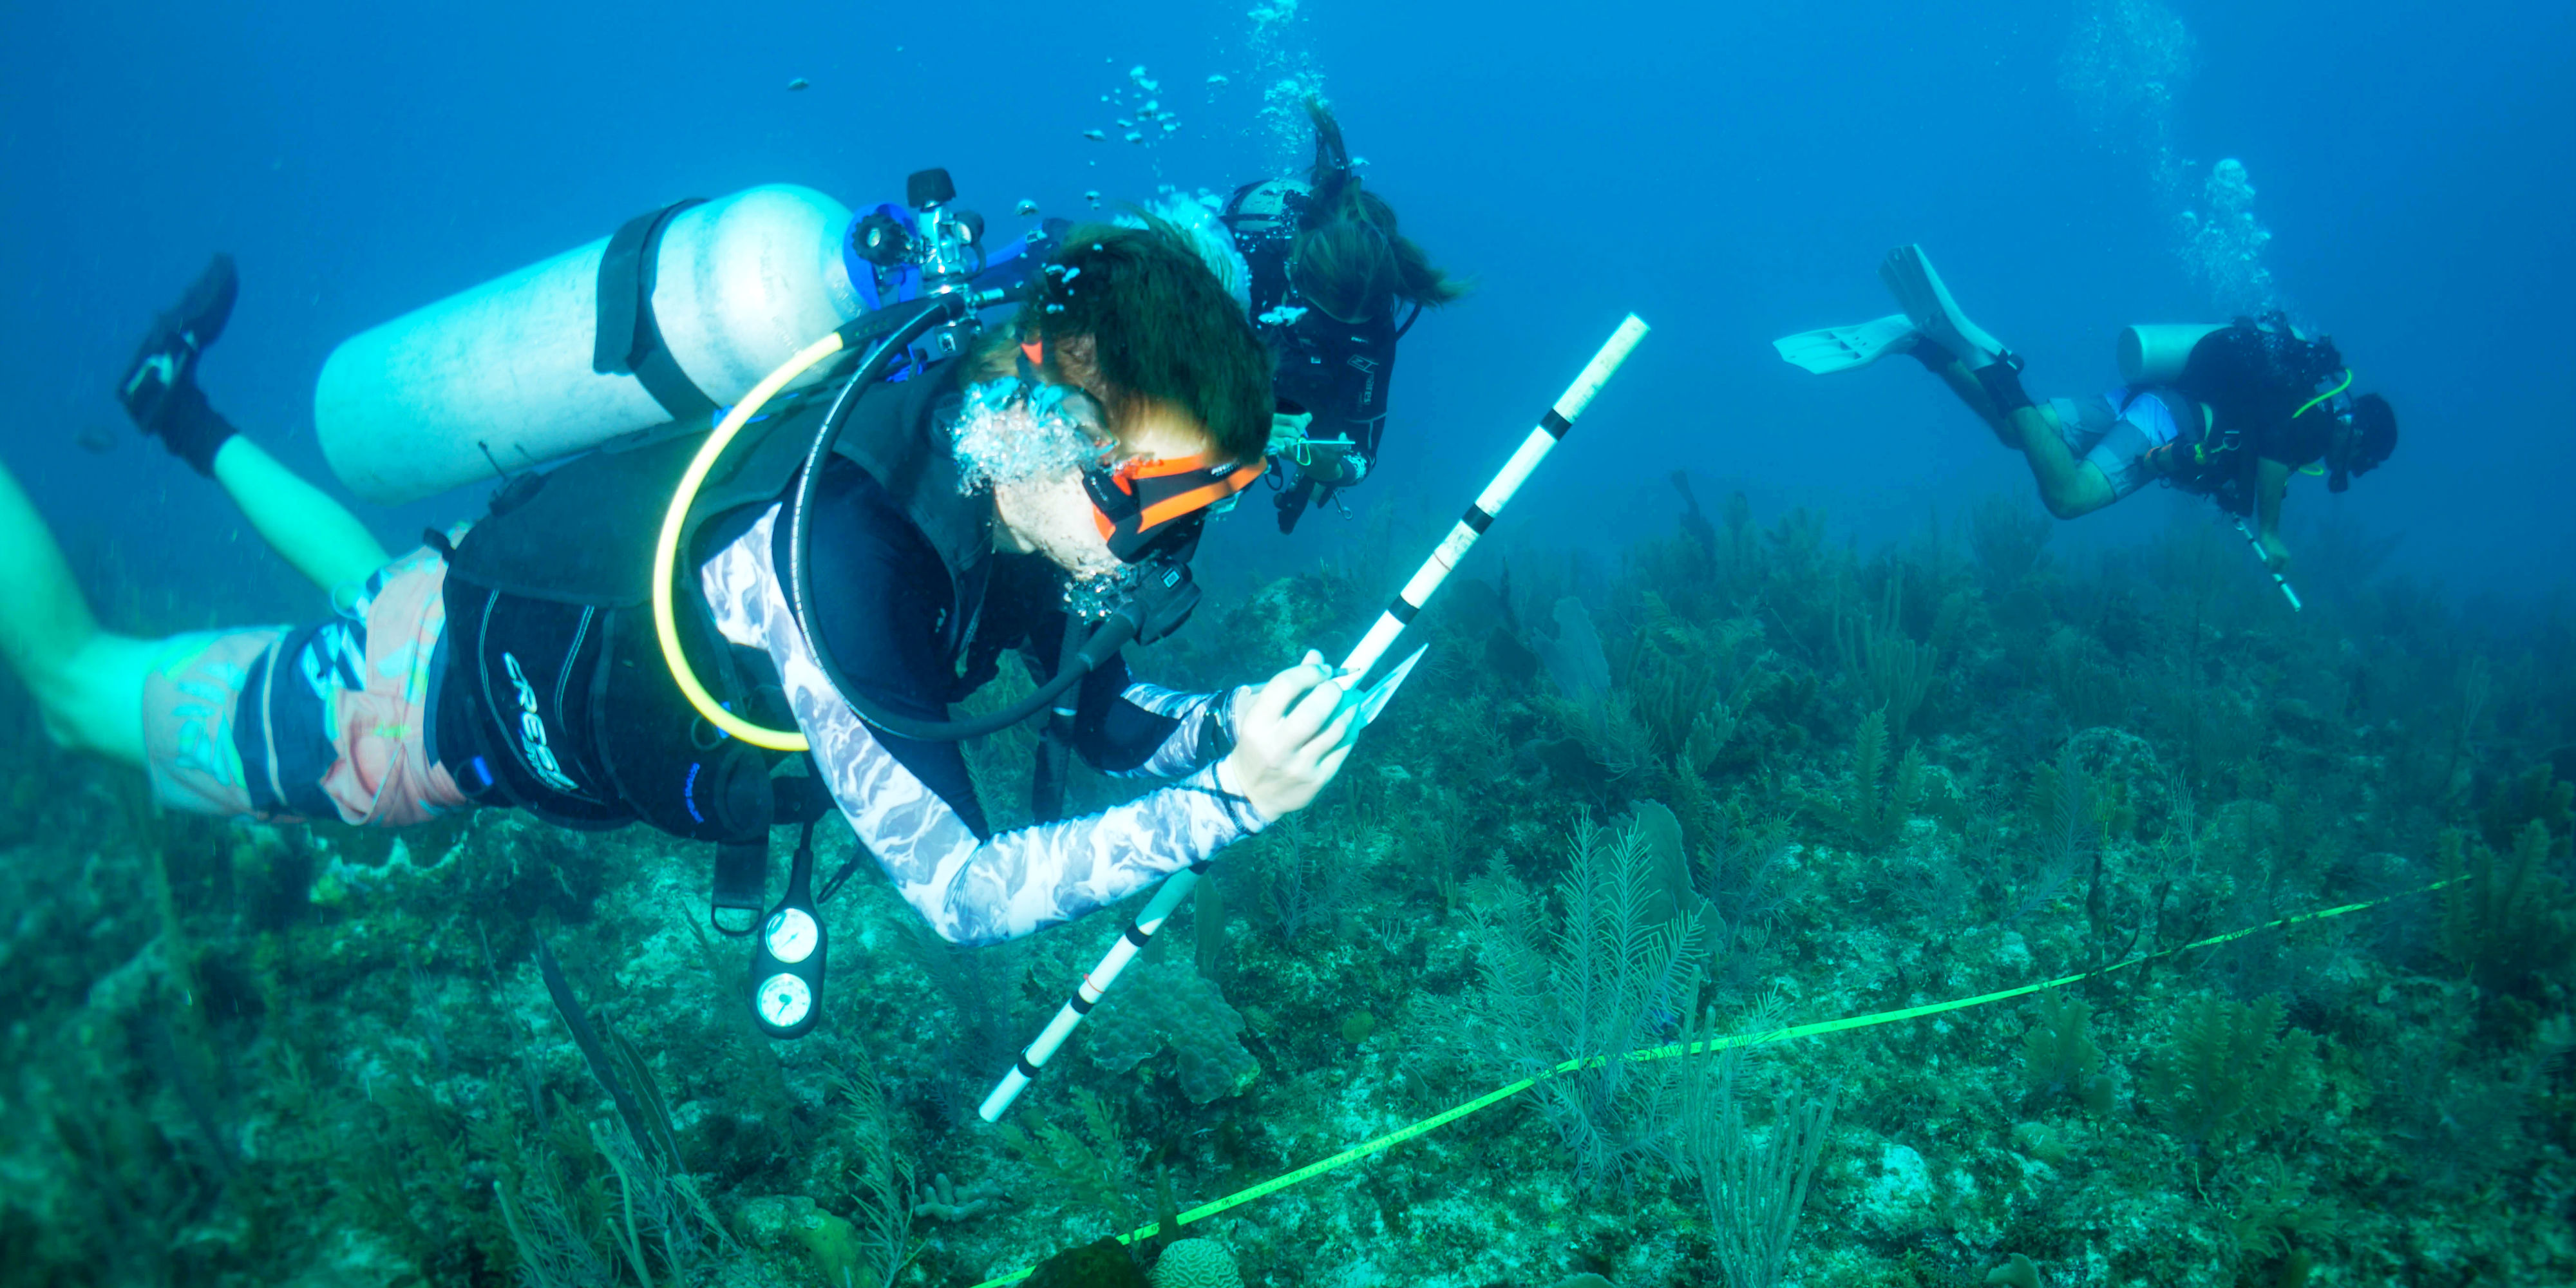 A GVI participant records information on marine species along the Mesoamerican Barrier Reef System. This data is used to inform marine conservation research in the region.